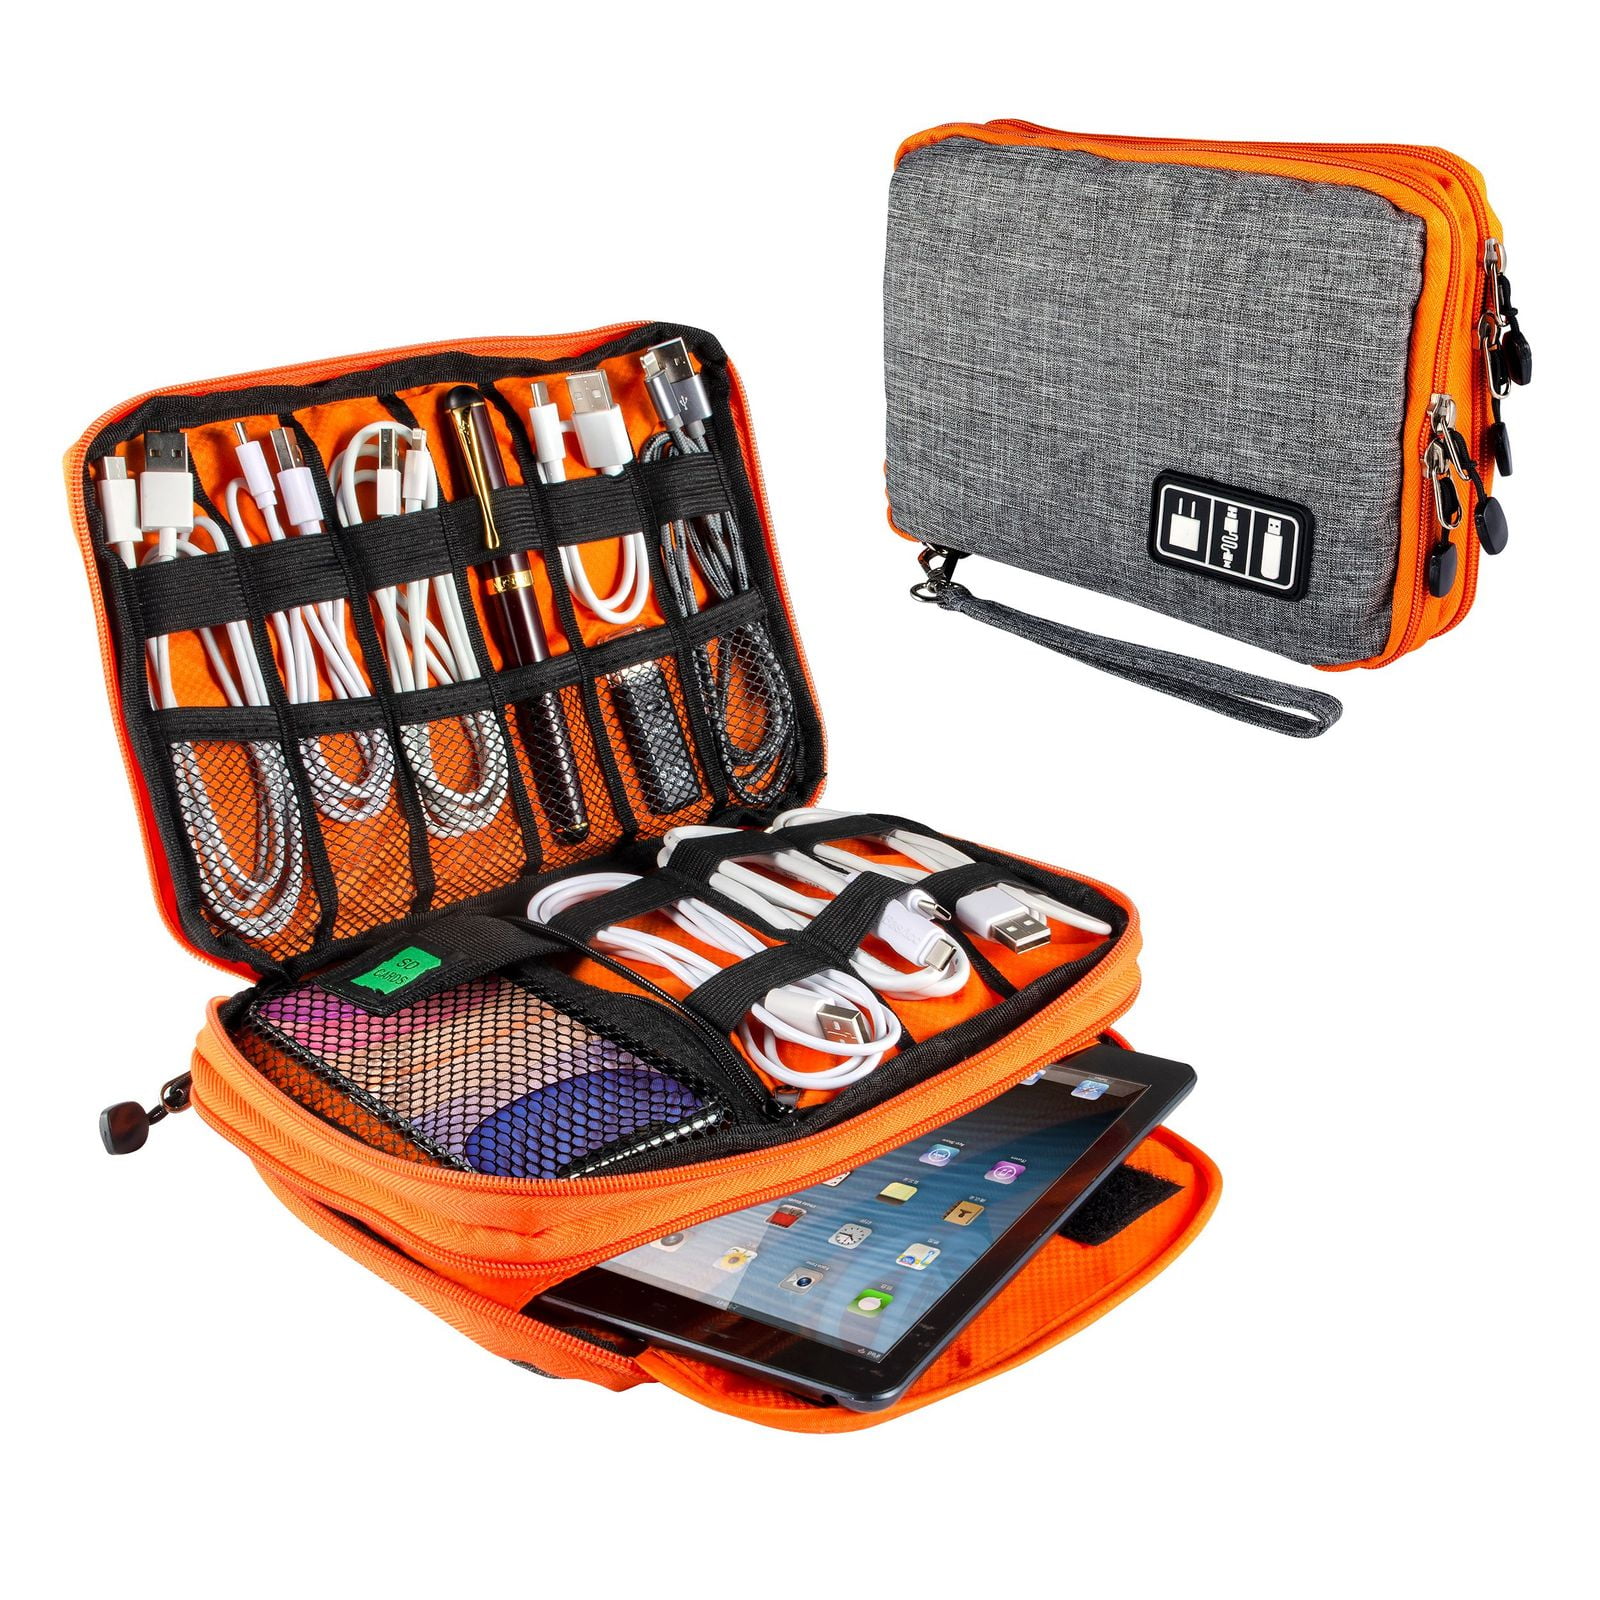 Travel-Electronic Digital Gadgets Universal Organizer Bags USB Cables Cord Case 